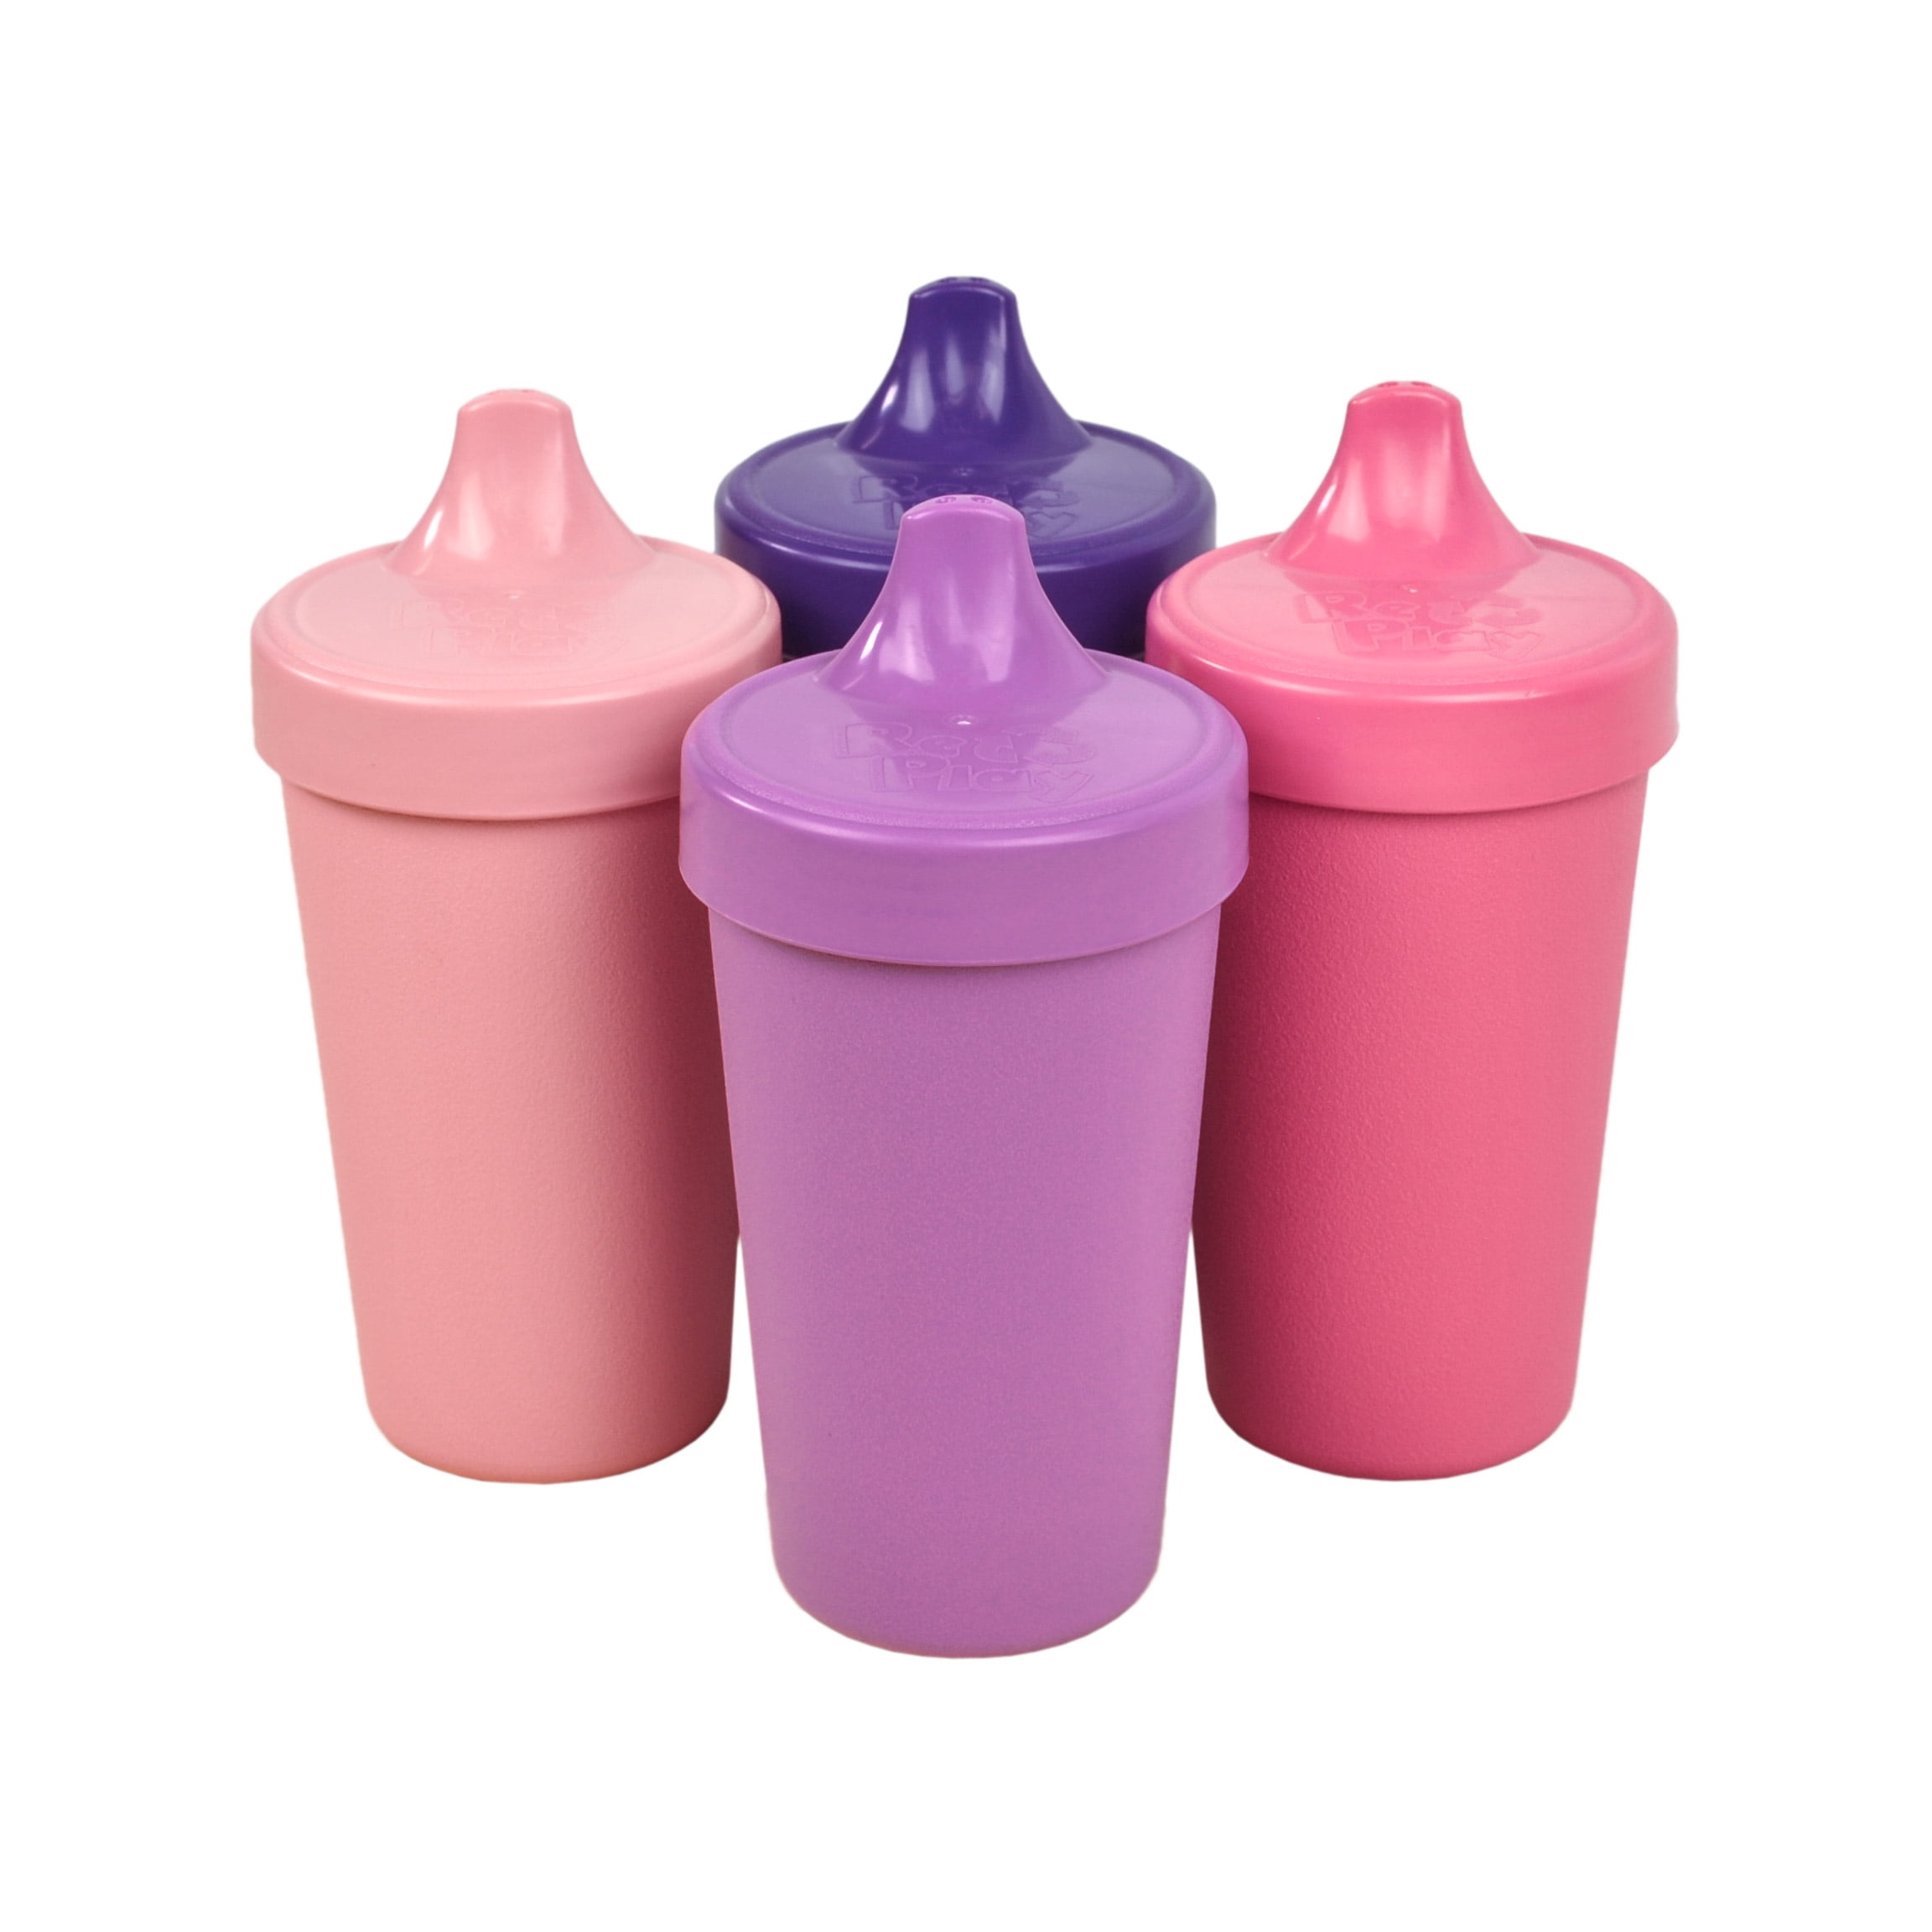 RE-PLAY 4pk No-Spill Sippy Cups, Made in USA